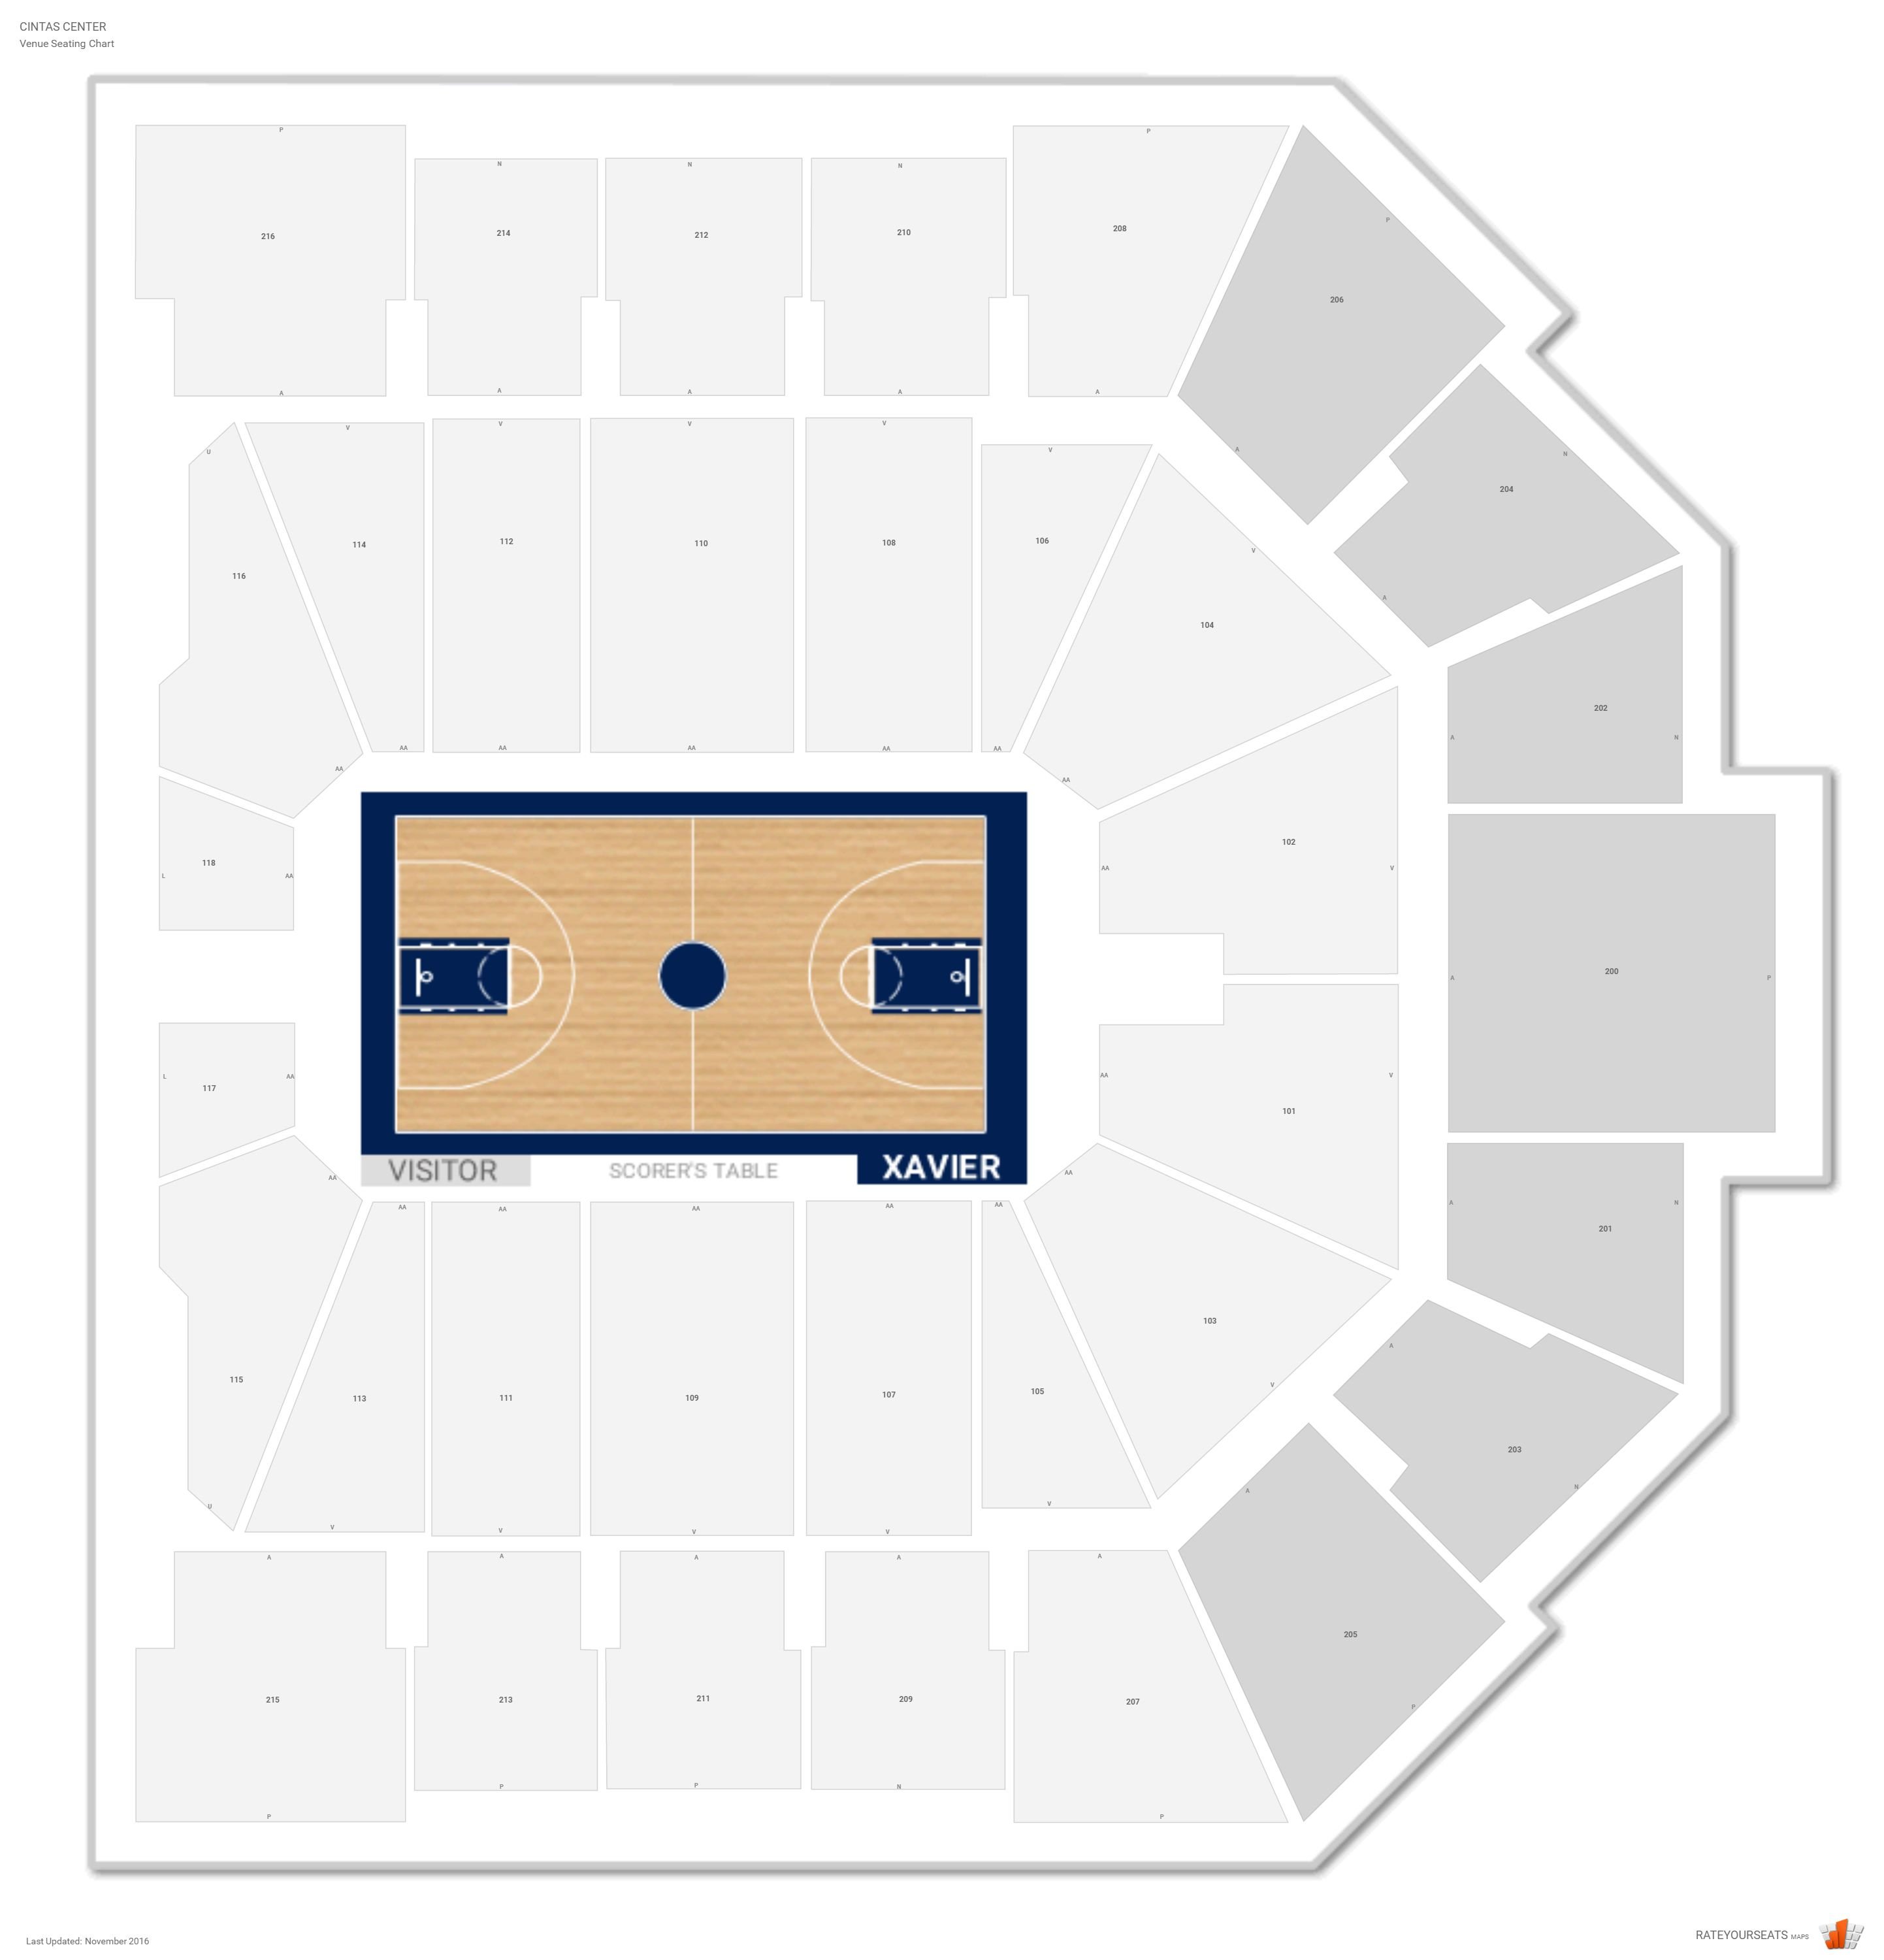 Cintas Center Seating Chart With Rows